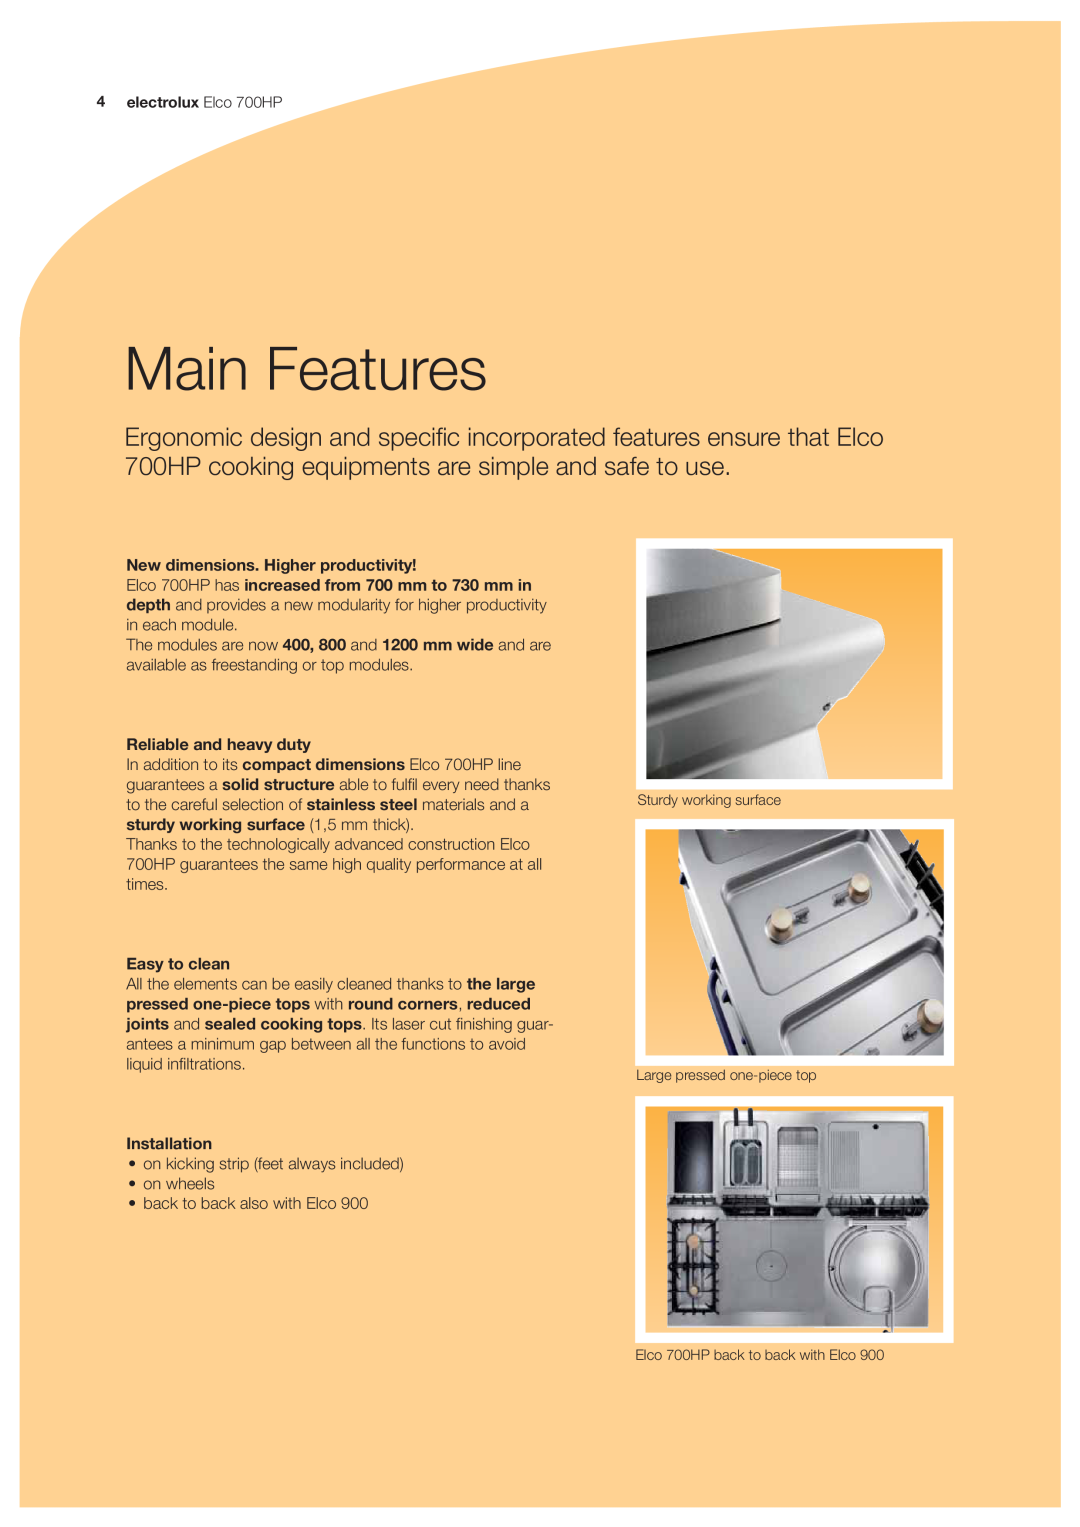 Electrolux 700HP Main Features, New dimensions. Higher productivity, Reliable and heavy duty, Easy to clean, Installation 